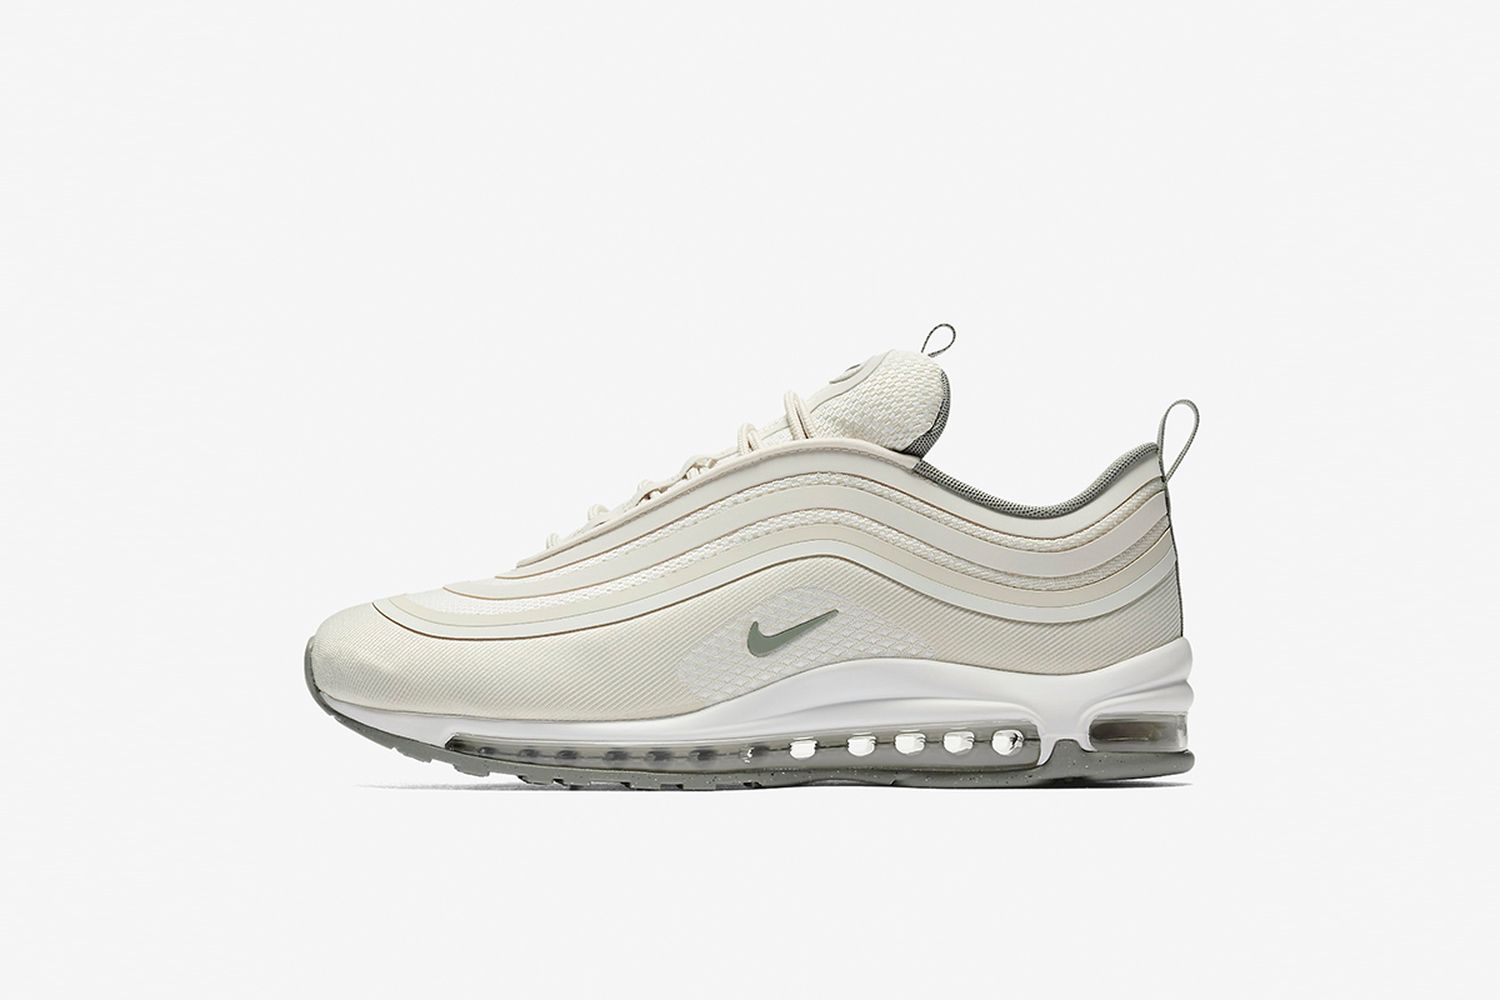 Here Are 9 Of The Best Nike Air Max 97 Sneakers To Buy Right Now